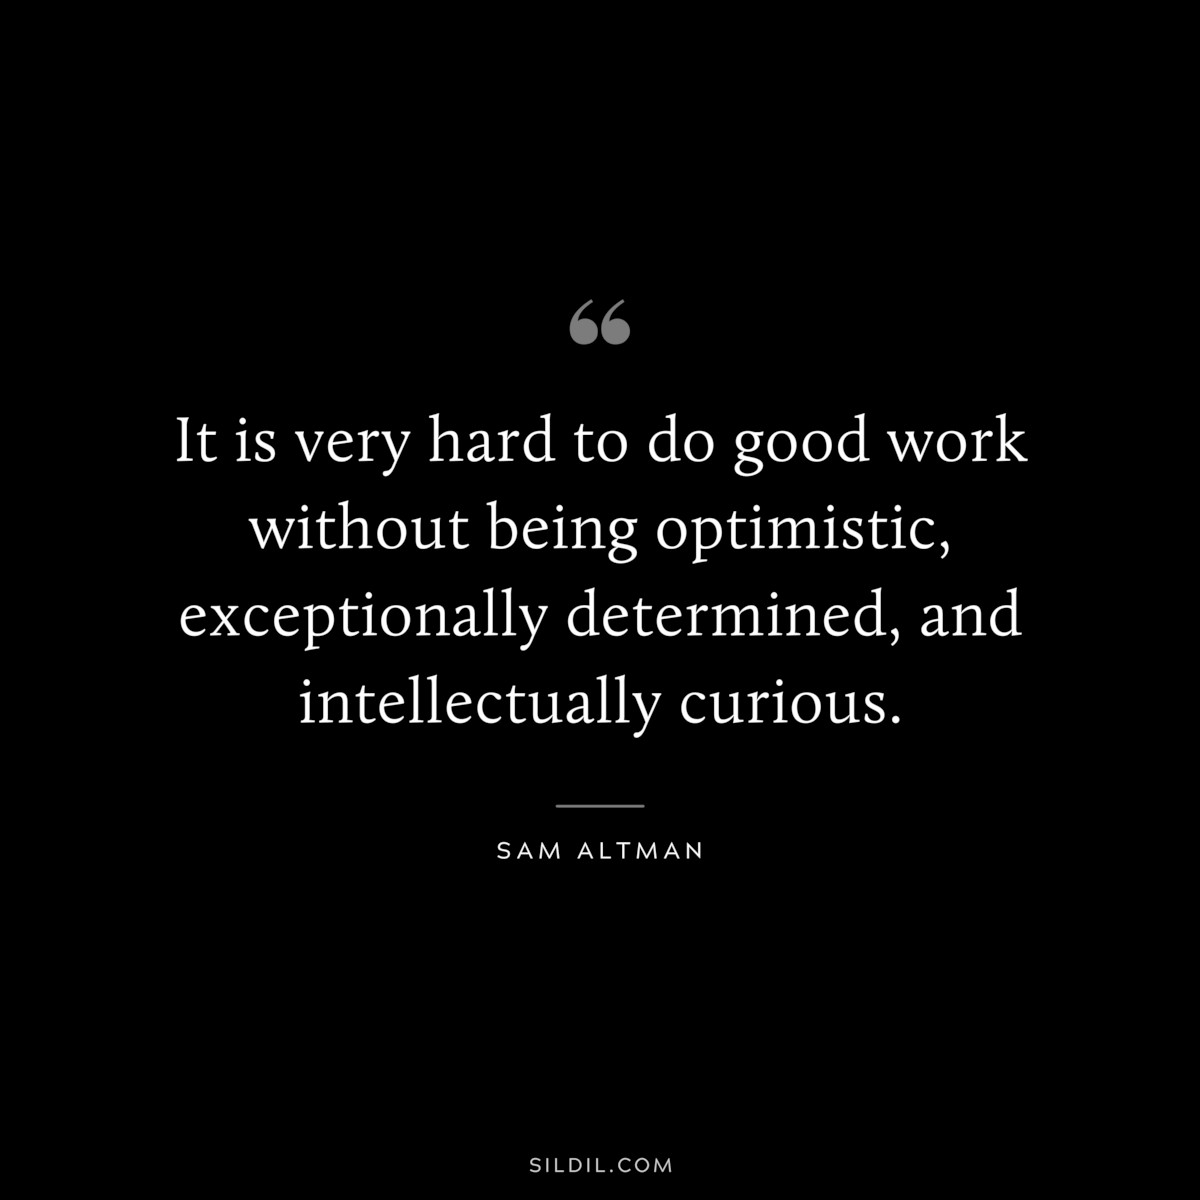 It is very hard to do good work without being optimistic, exceptionally determined, and intellectually curious. ― Sam Altman